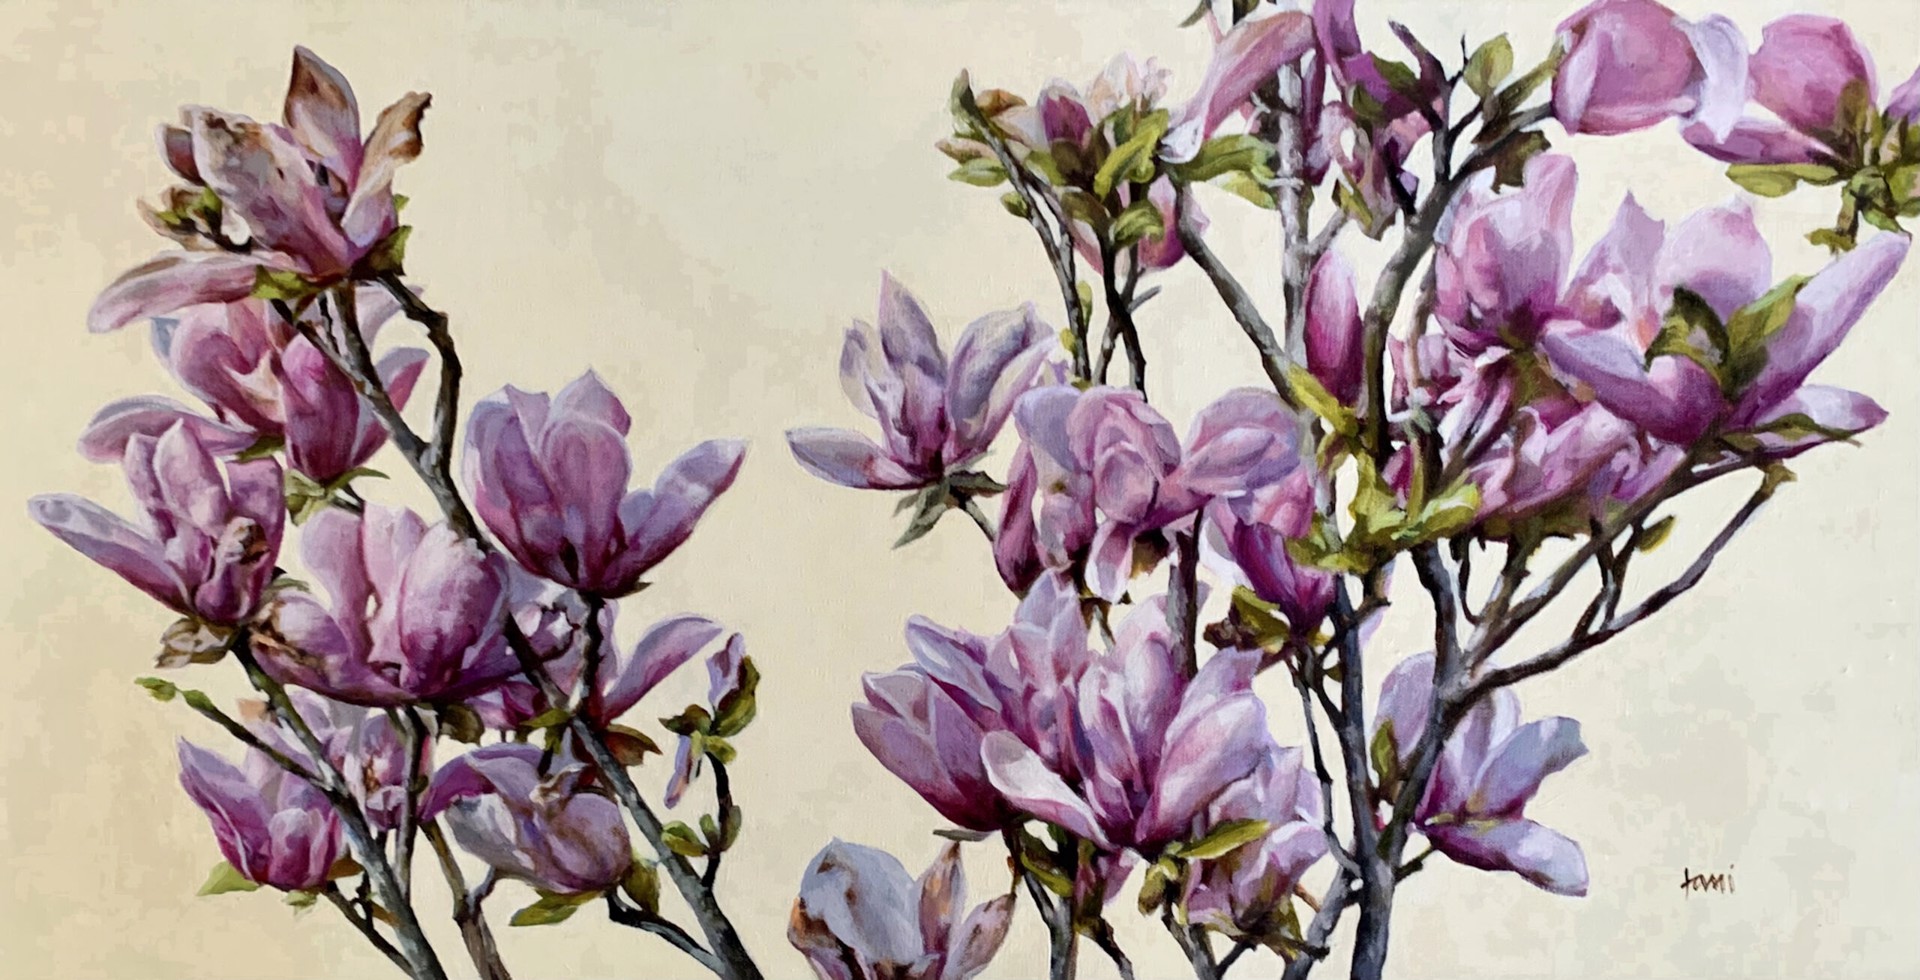 Lani F. Browning "'Jane' Tulip Magnolia" by Oil Painters of America